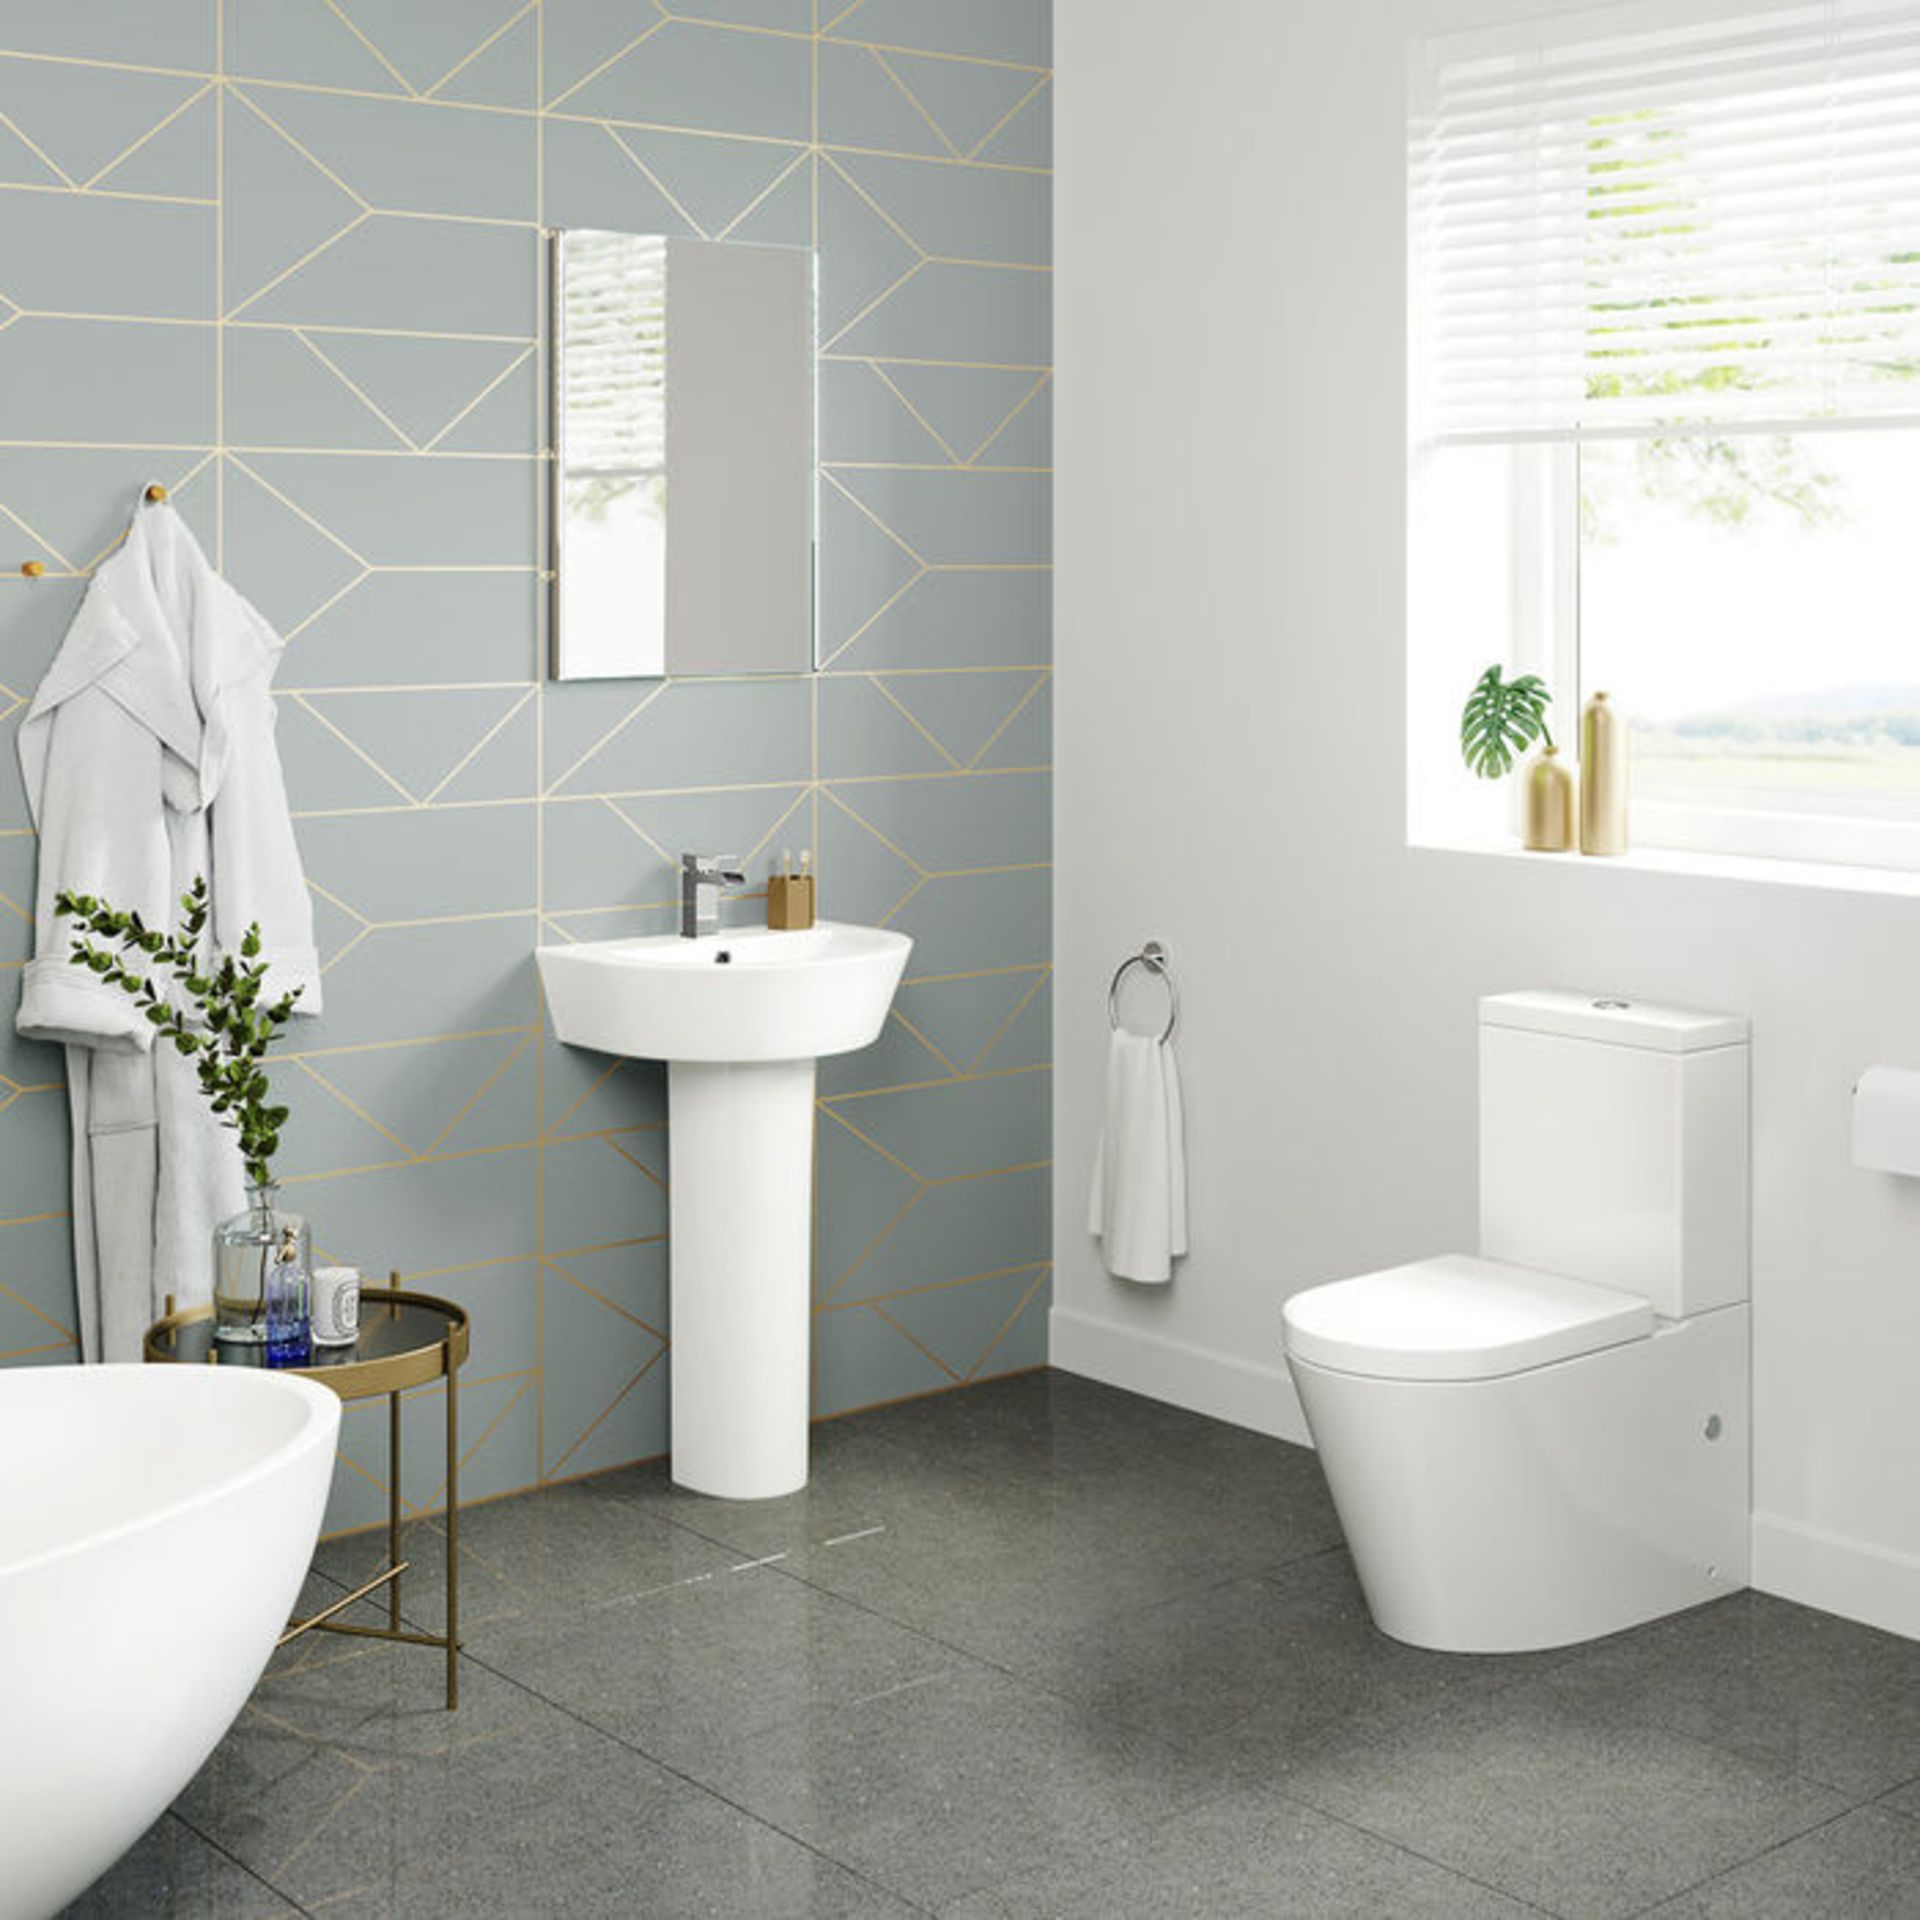 NEW & BOXED Lyon II Close Coupled Toilet & Cistern inc Luxury Soft Close Seat. RRP £499.99. 63... - Image 2 of 4